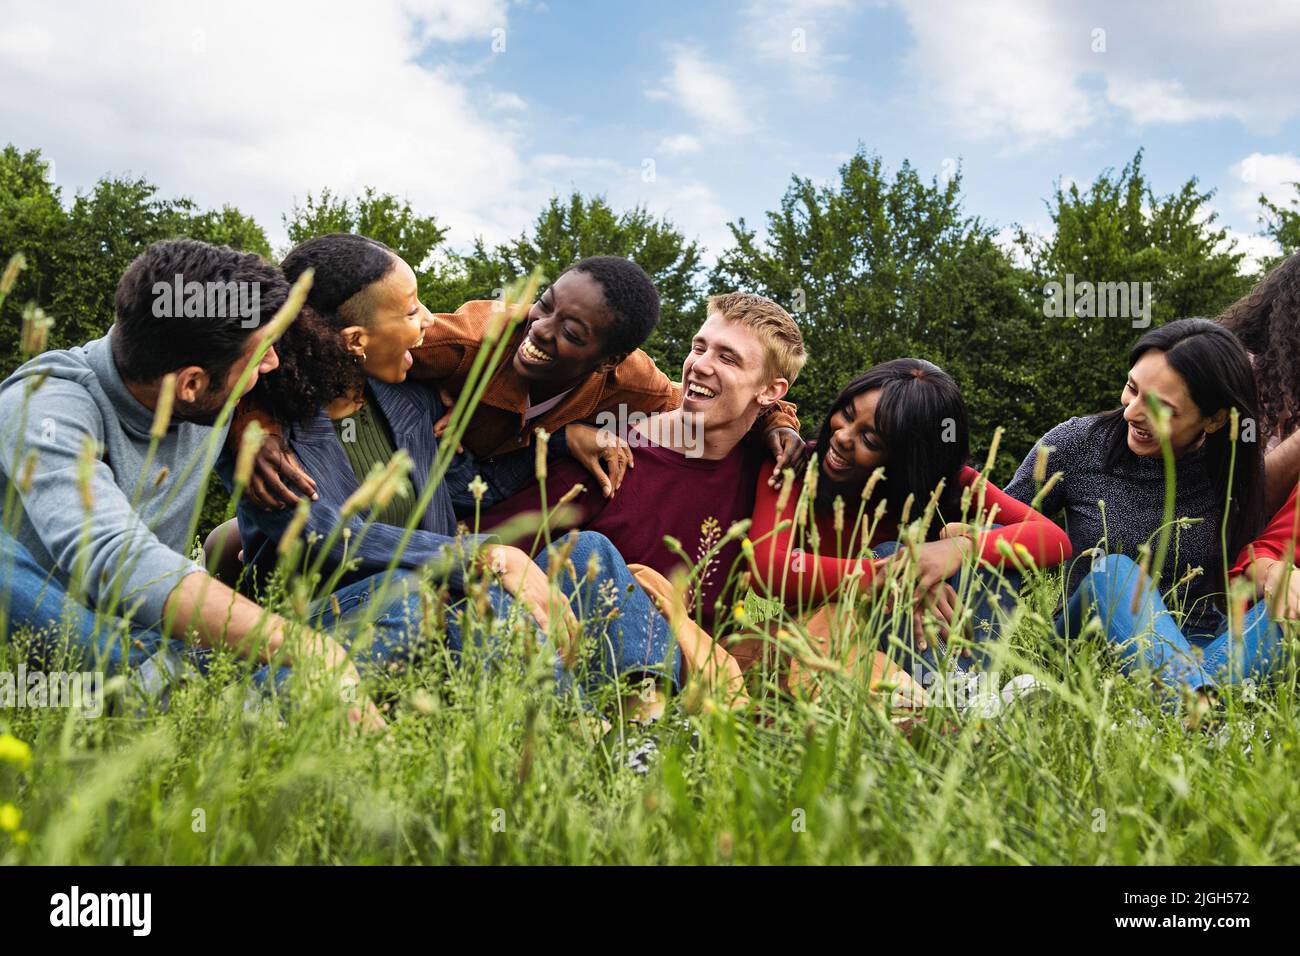 Multiracial community of gen z happy friends having fun sitting in the grass - concept of multiethnic youth culture, diversity, oneness, trust Stock Photo